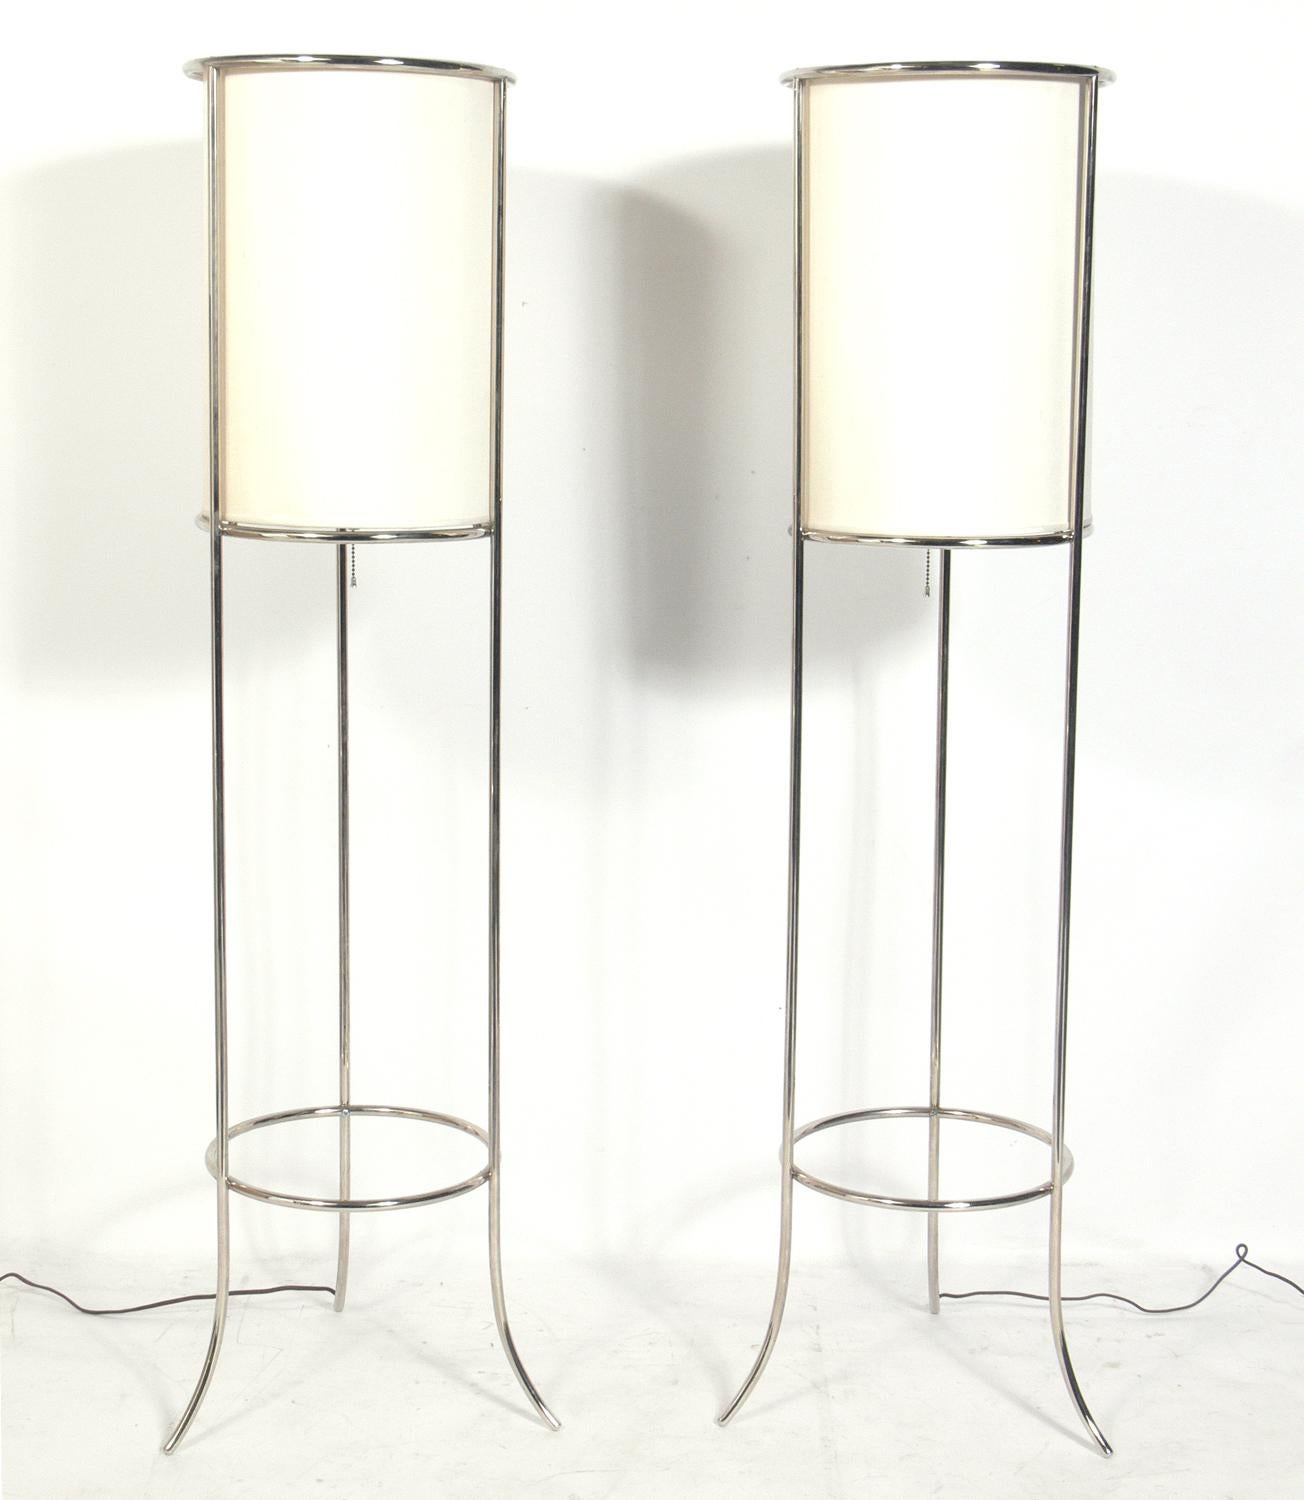 Pair of nickel floor lamps, attributed to T.H. Robsjohn-Gibbings for Hansen, unsigned, American, circa 1980s. They have been rewired and are ready to use.